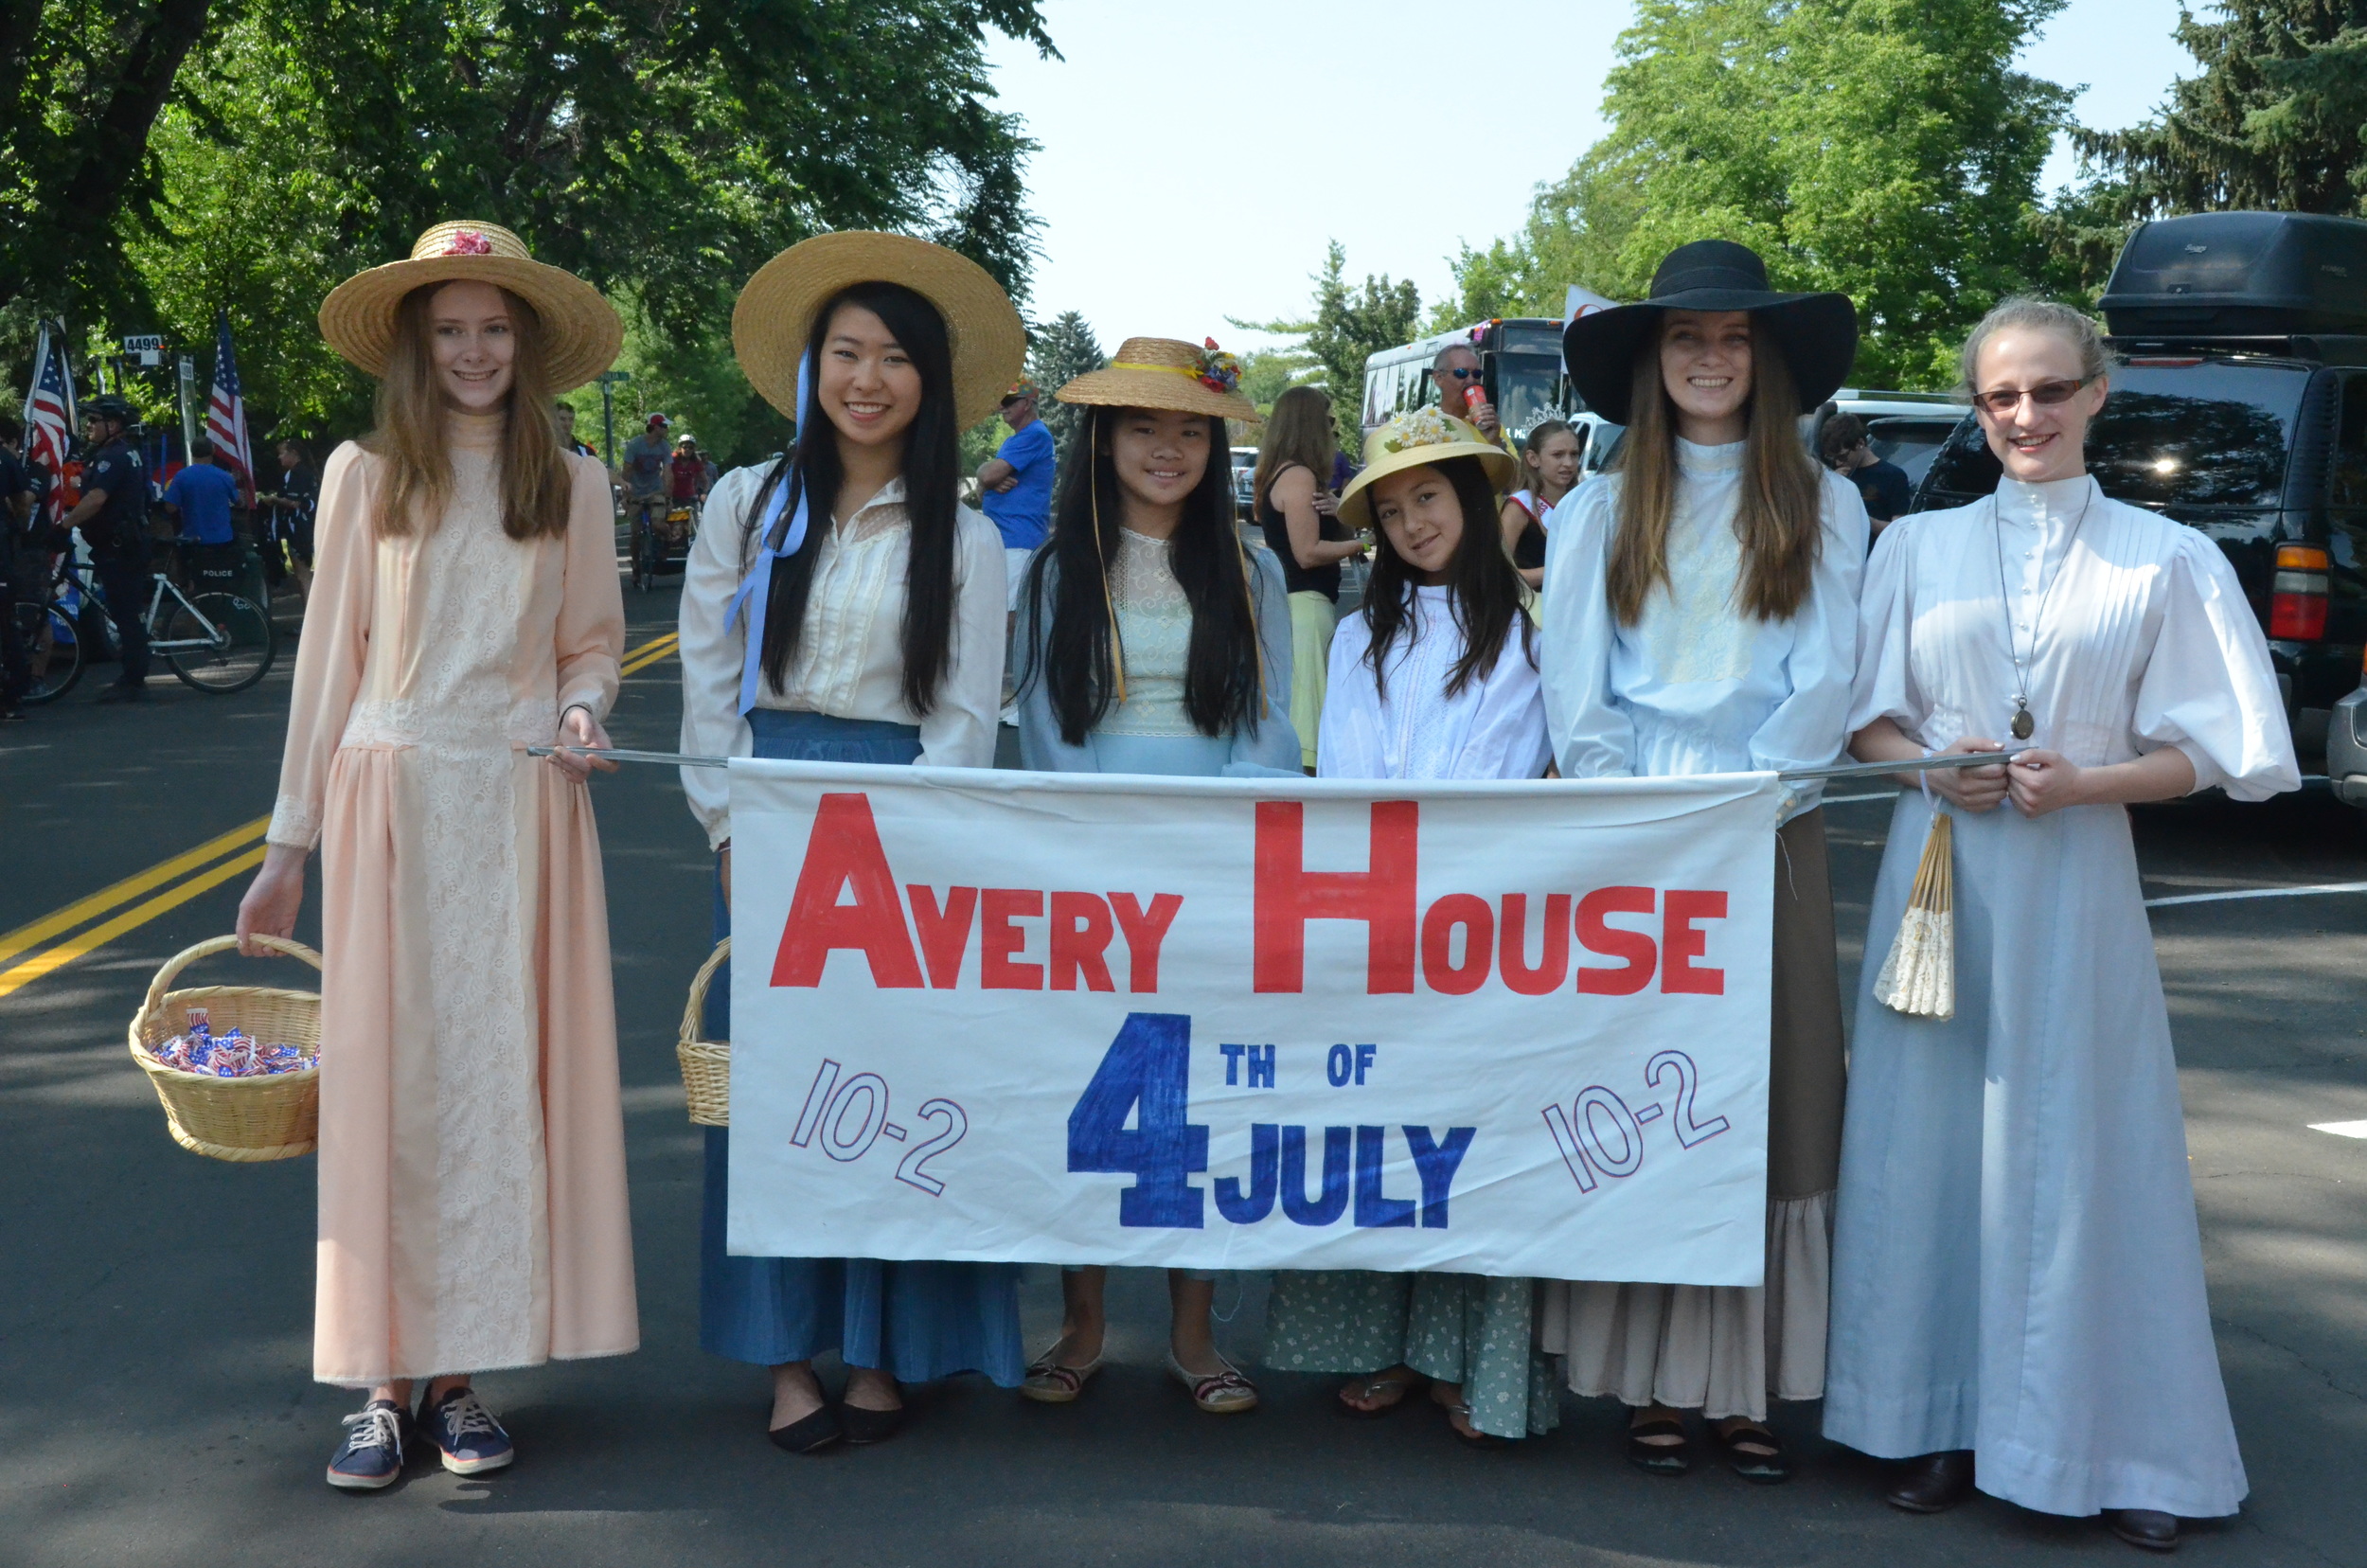  The city's July 4th parade includes Avery volunteers 